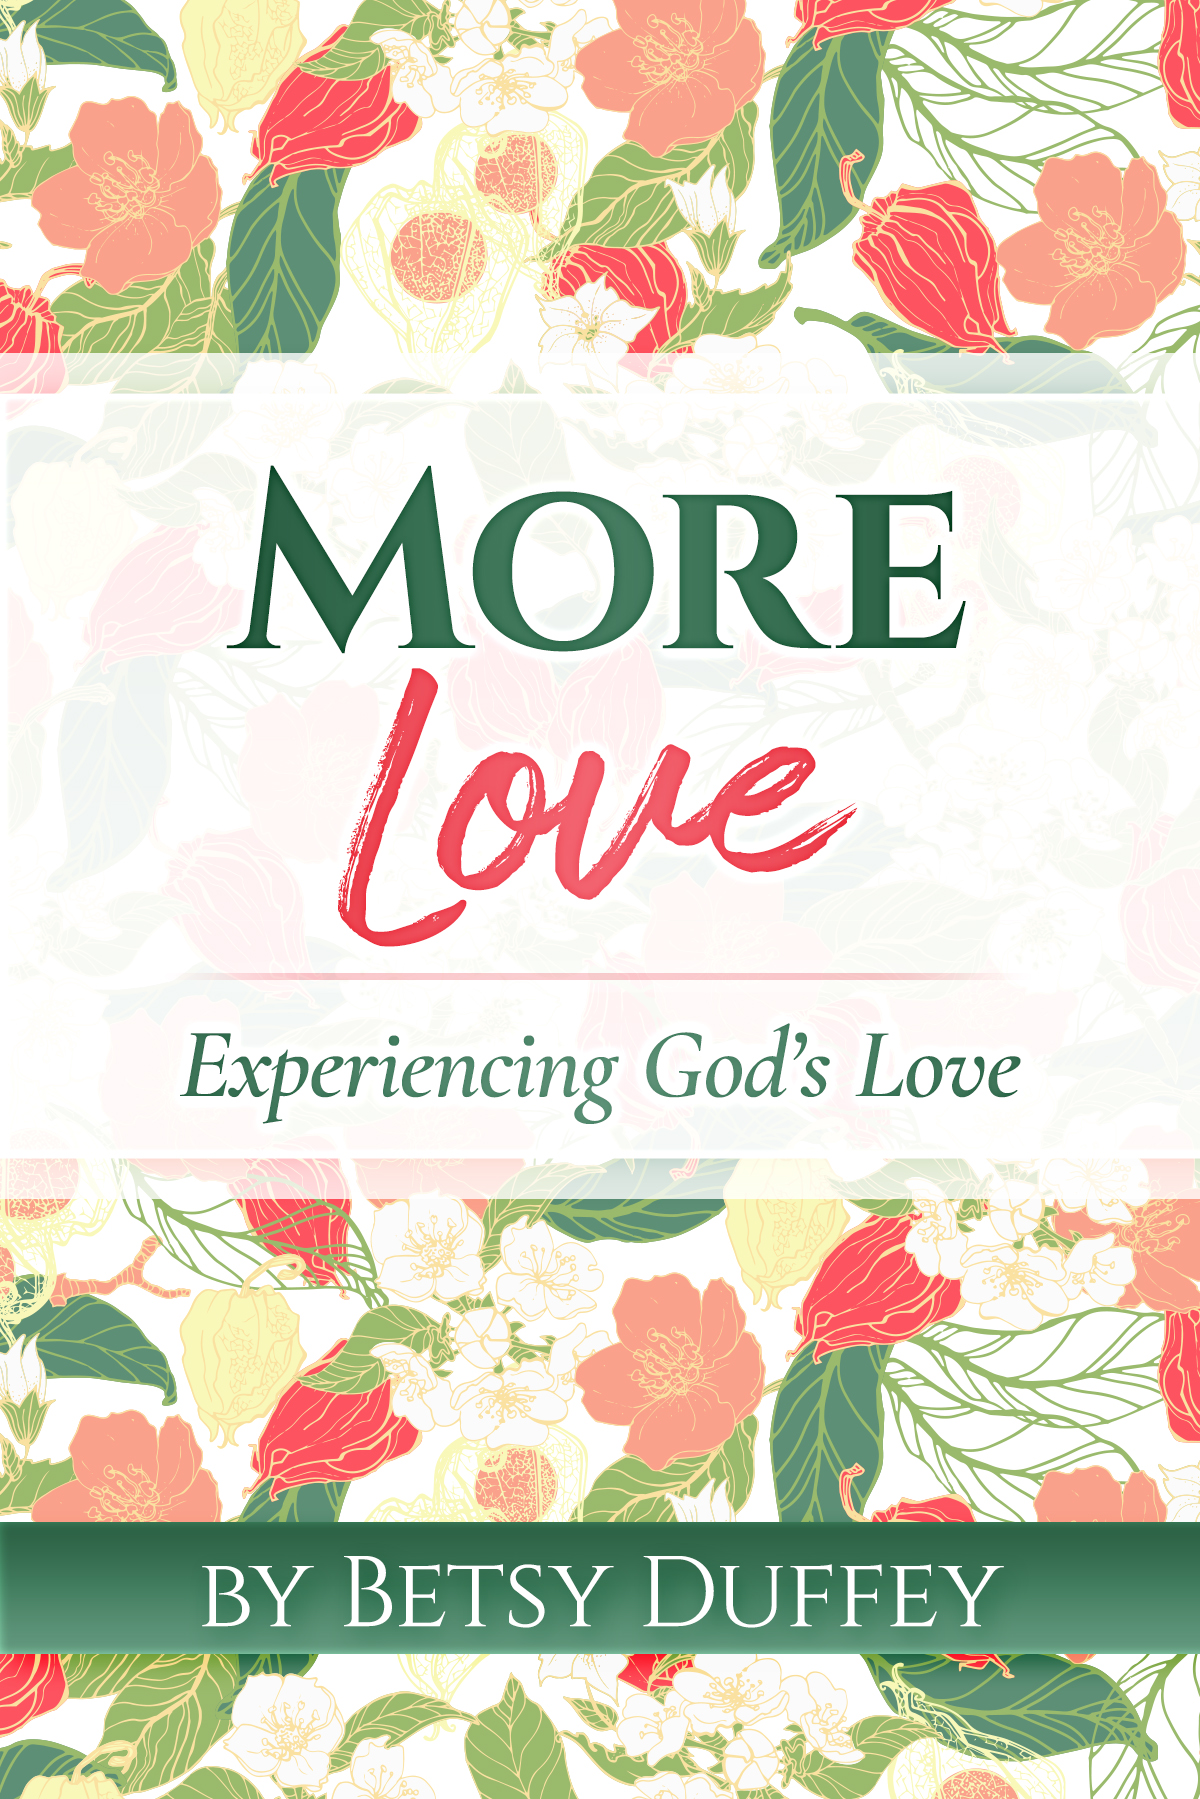 FREE: More Love: Experiencing God’s Love by Betsy Duffey